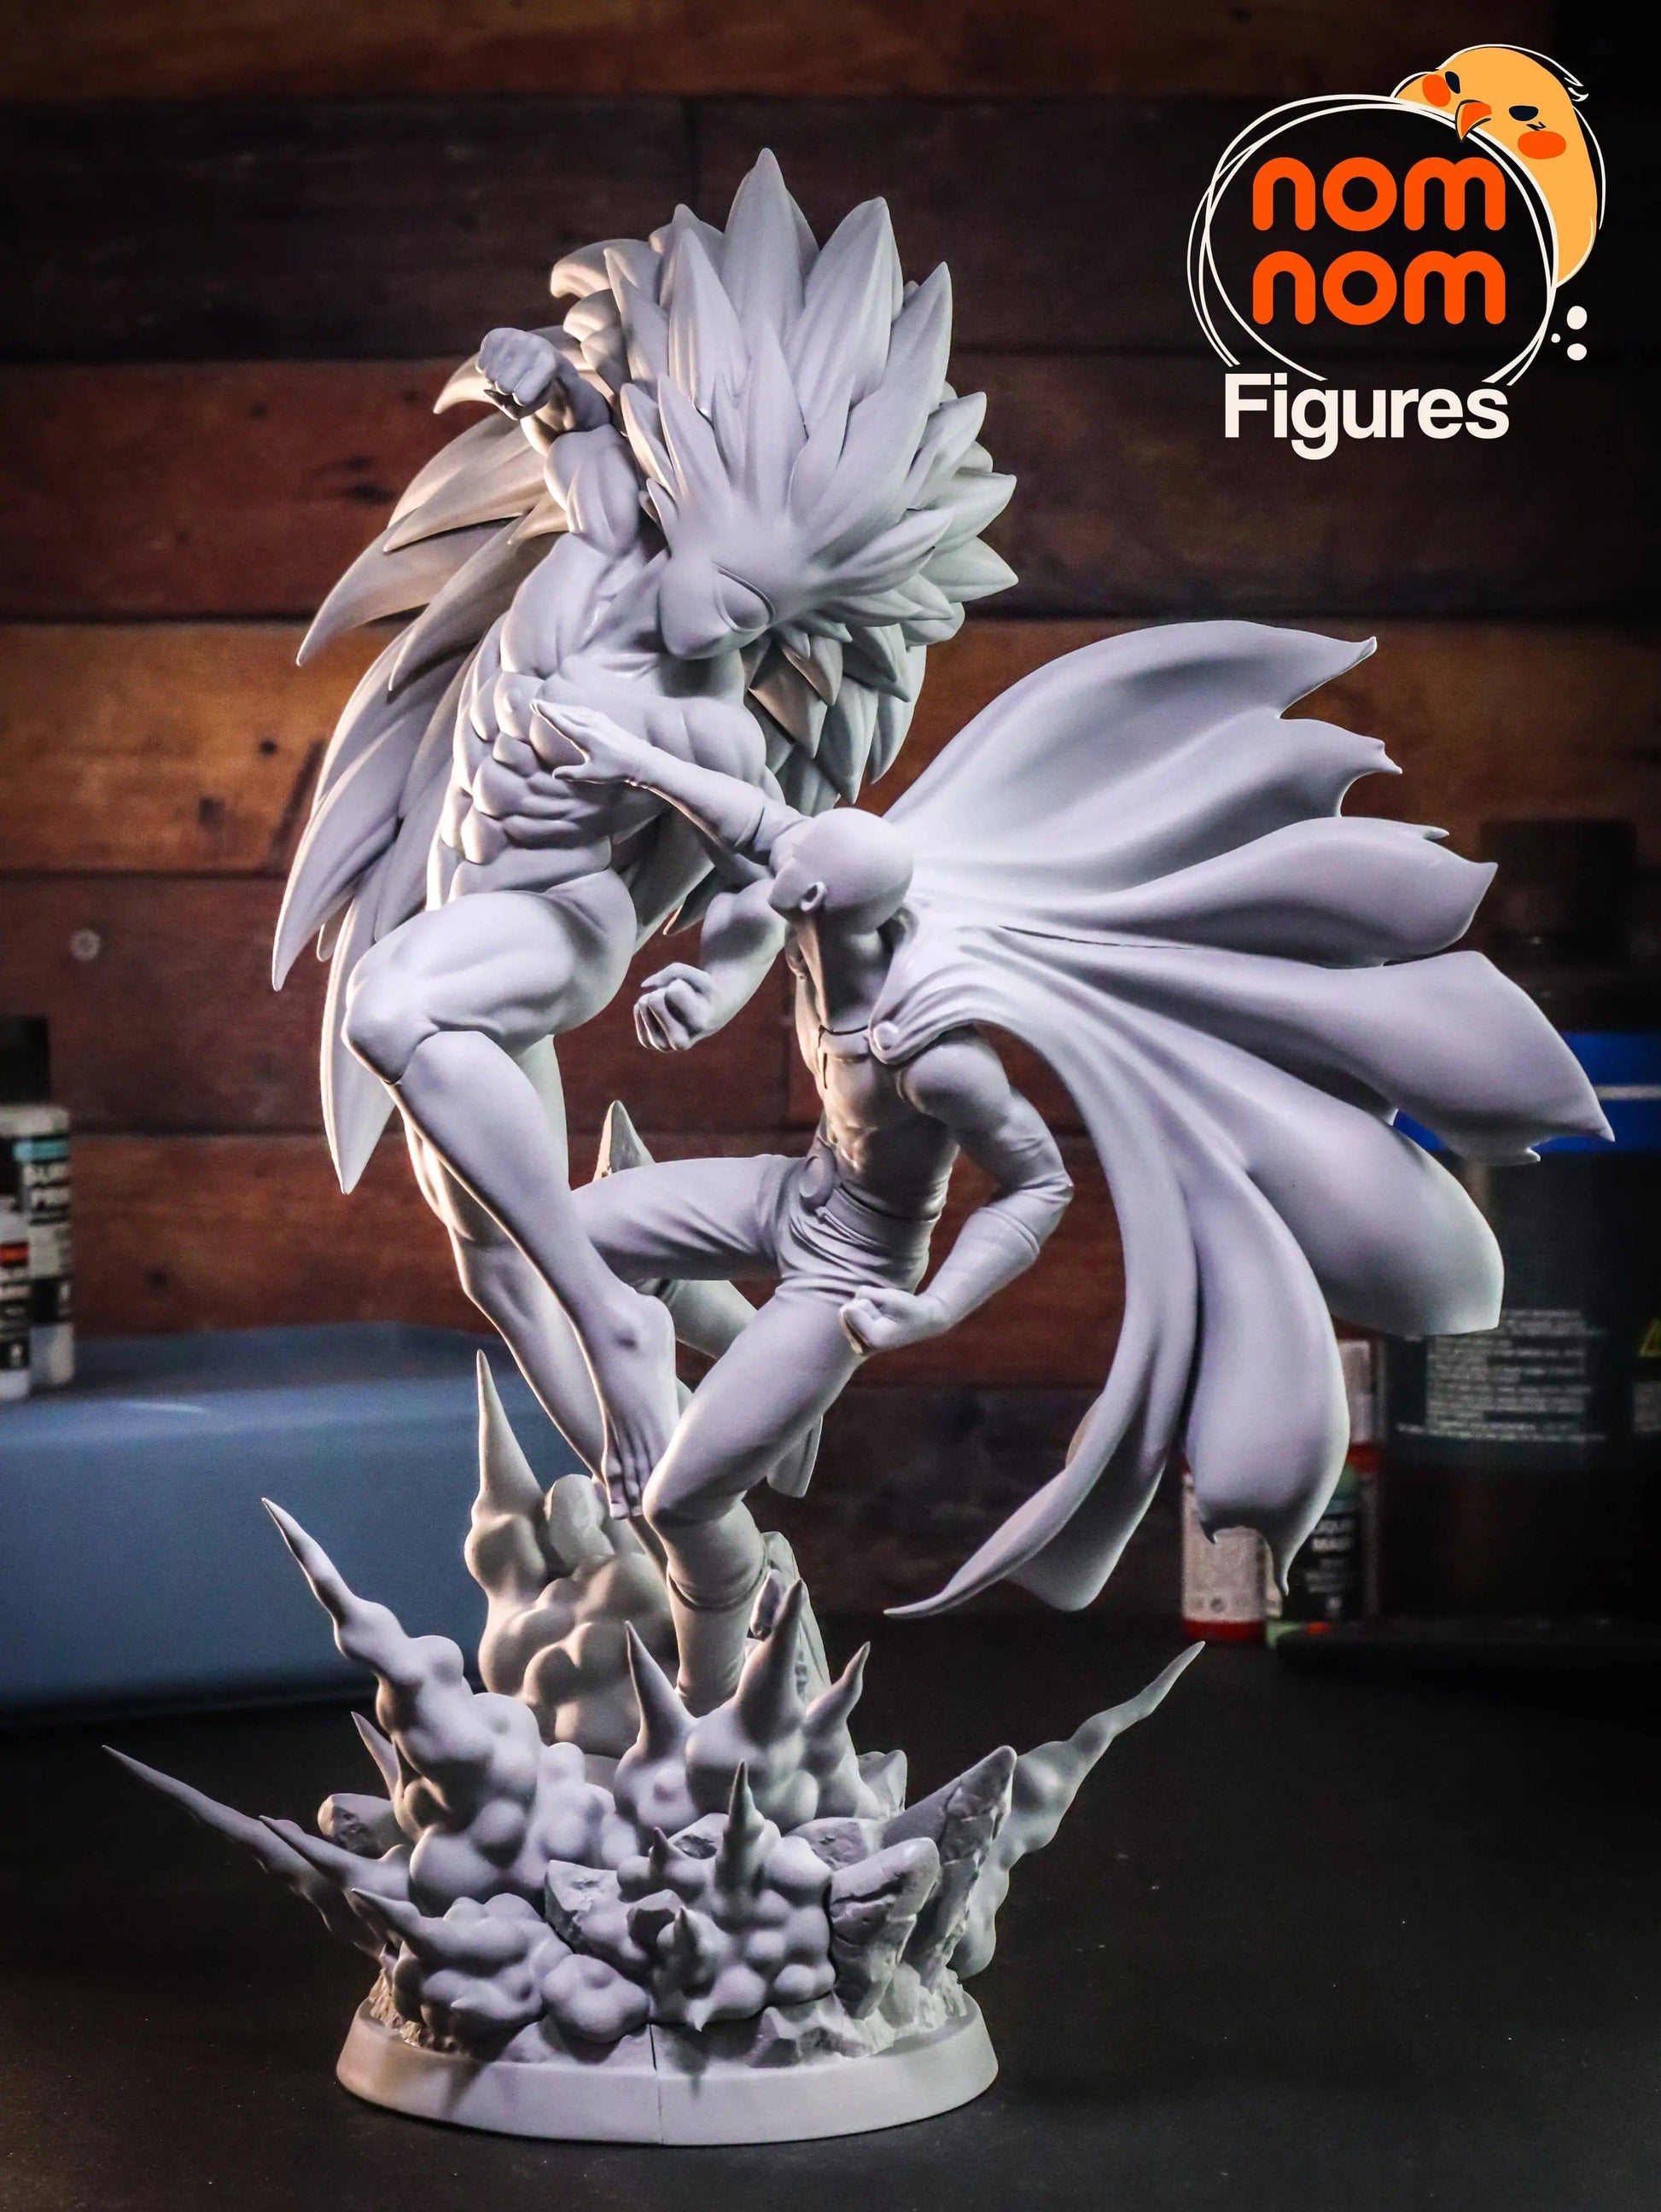 Epic Battle Settled with One Punch | Resin Garage Kit Sculpture Anime Video Game Fan Art Statue | Nomnom Figures - Tattles Told 3D